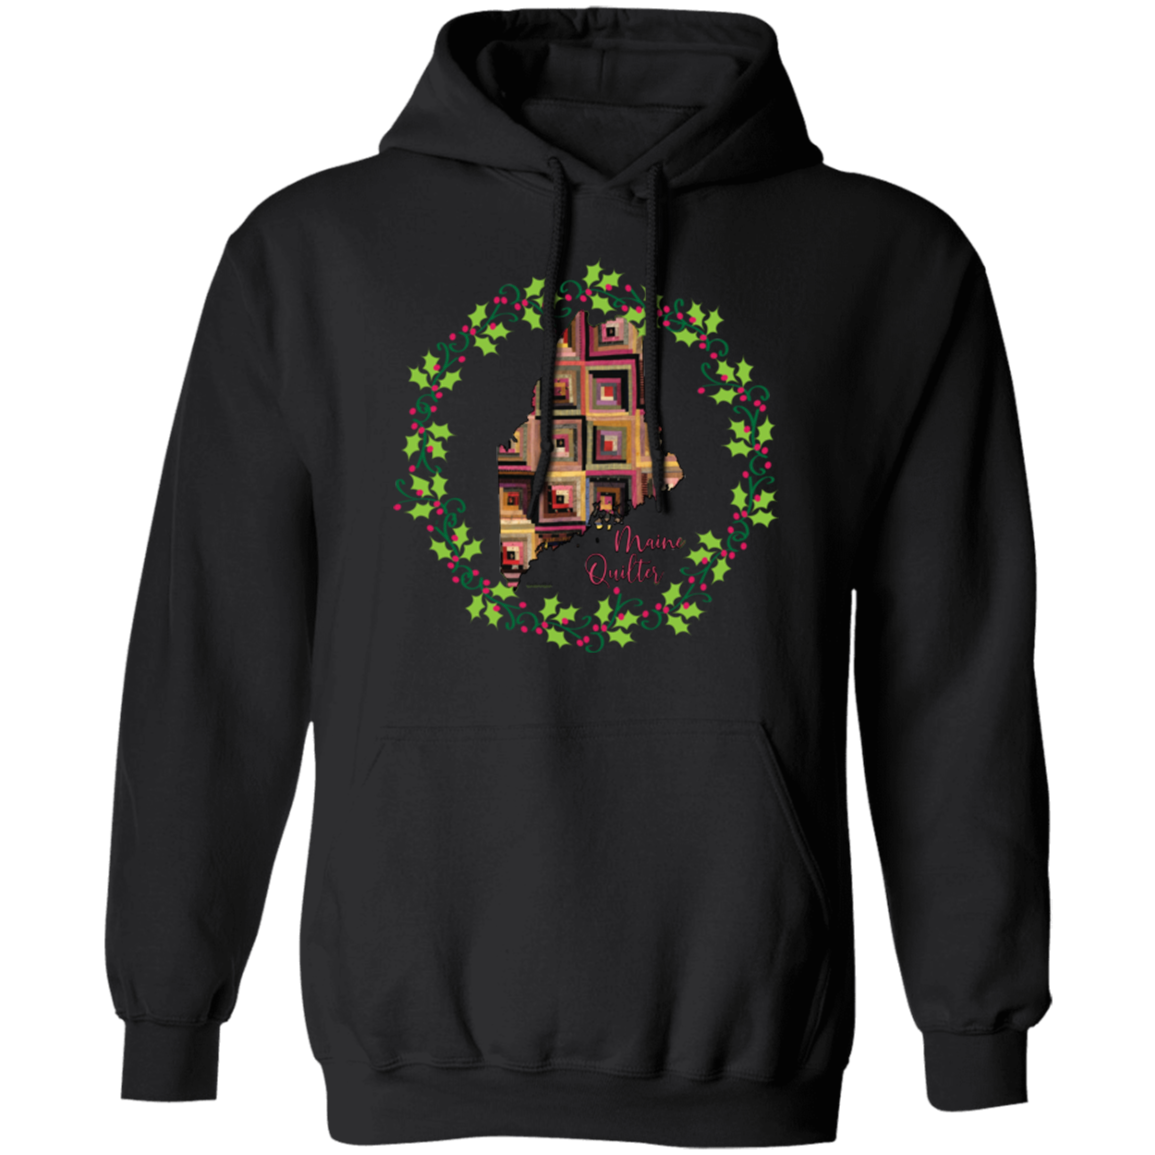 Maine Quilter Christmas Pullover Hoodie